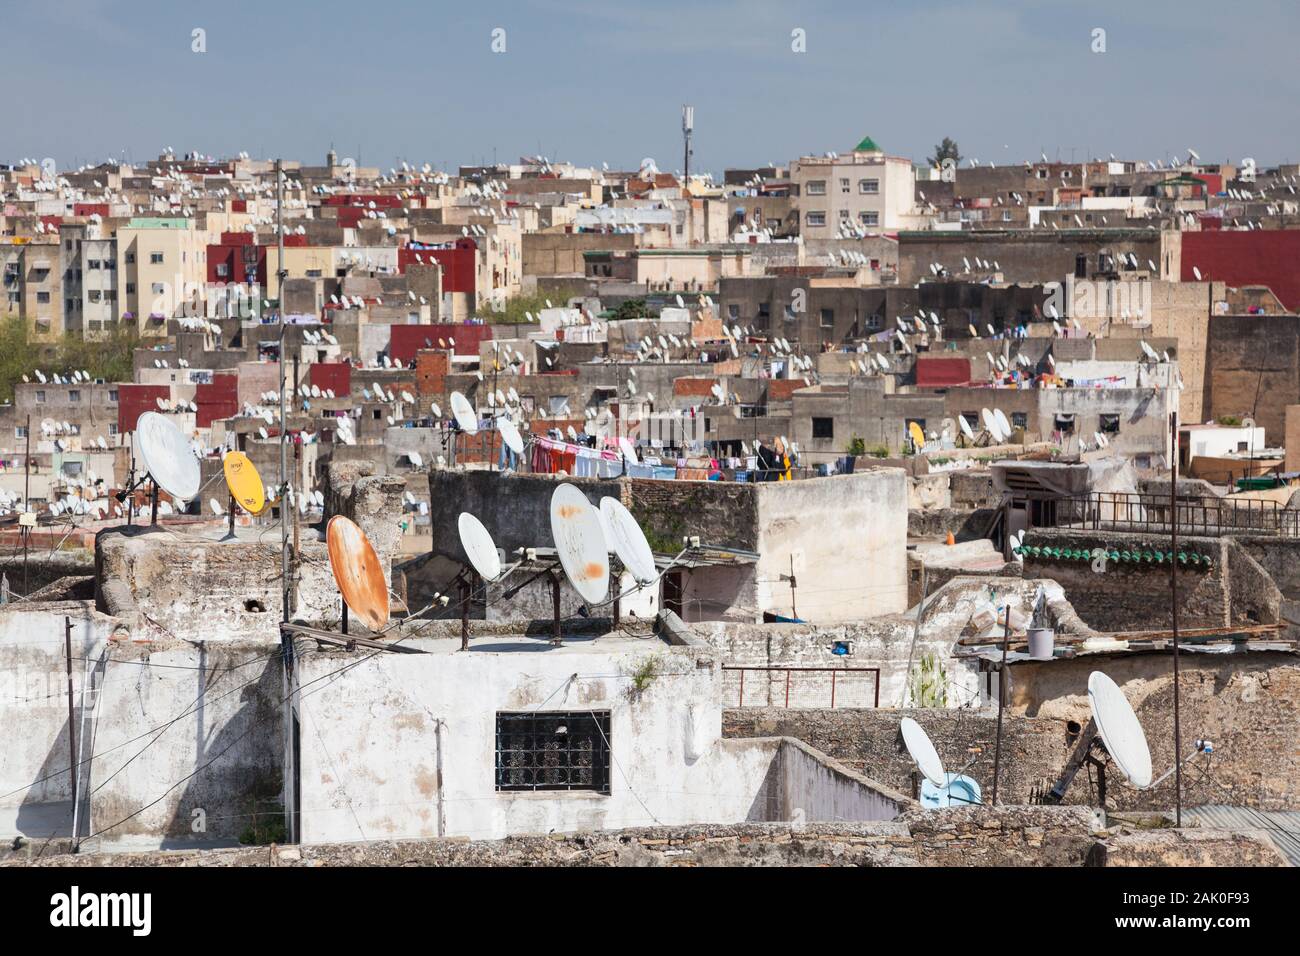 Many satellite dishes on the rooftops of buildings in Fes (also known as Fez), Morocco Stock Photo